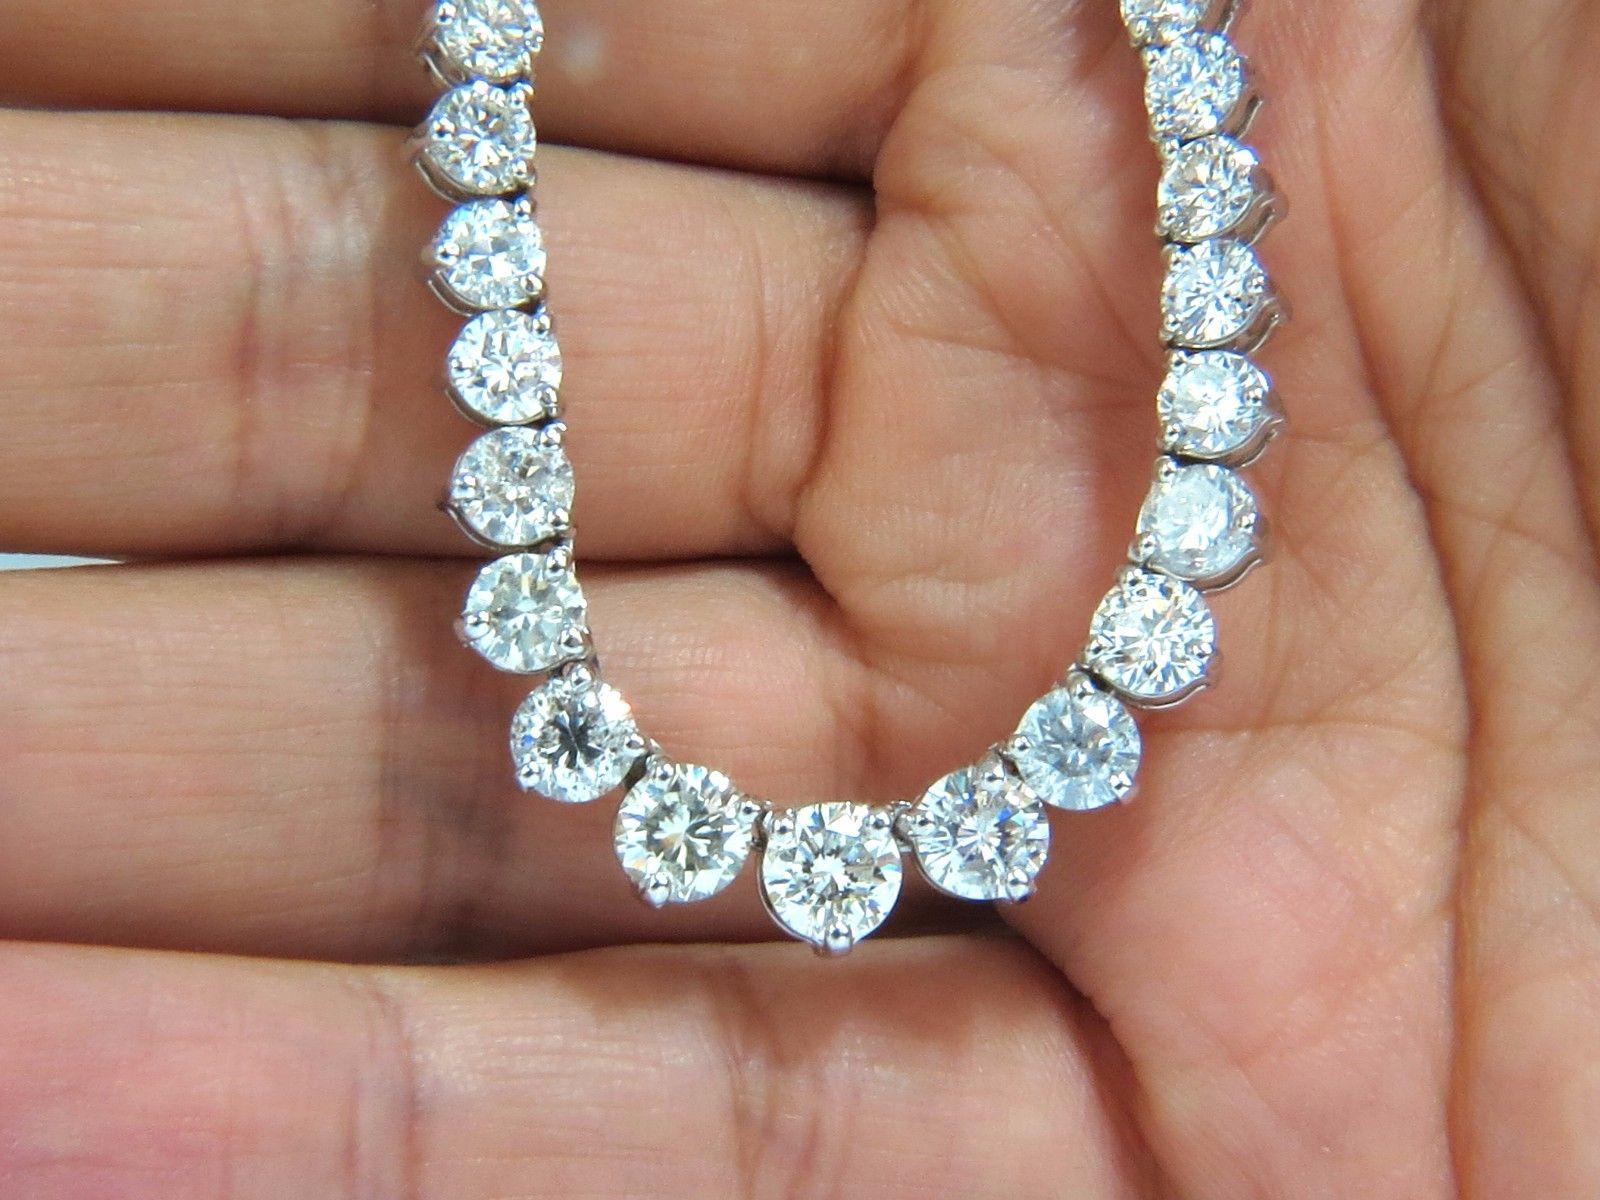 Classic Diamond Riviera / Tennis Necklace

20.00ct. Natural 109 diamonds.

.95ct center, surrounded by .87ct, .75ct & .50ct. etc.

Rounds & Full cuts

H-I colors Si-2 Si-3 clarity. 

14kt white gold 

33.3 grams.

17 Inches - wearable